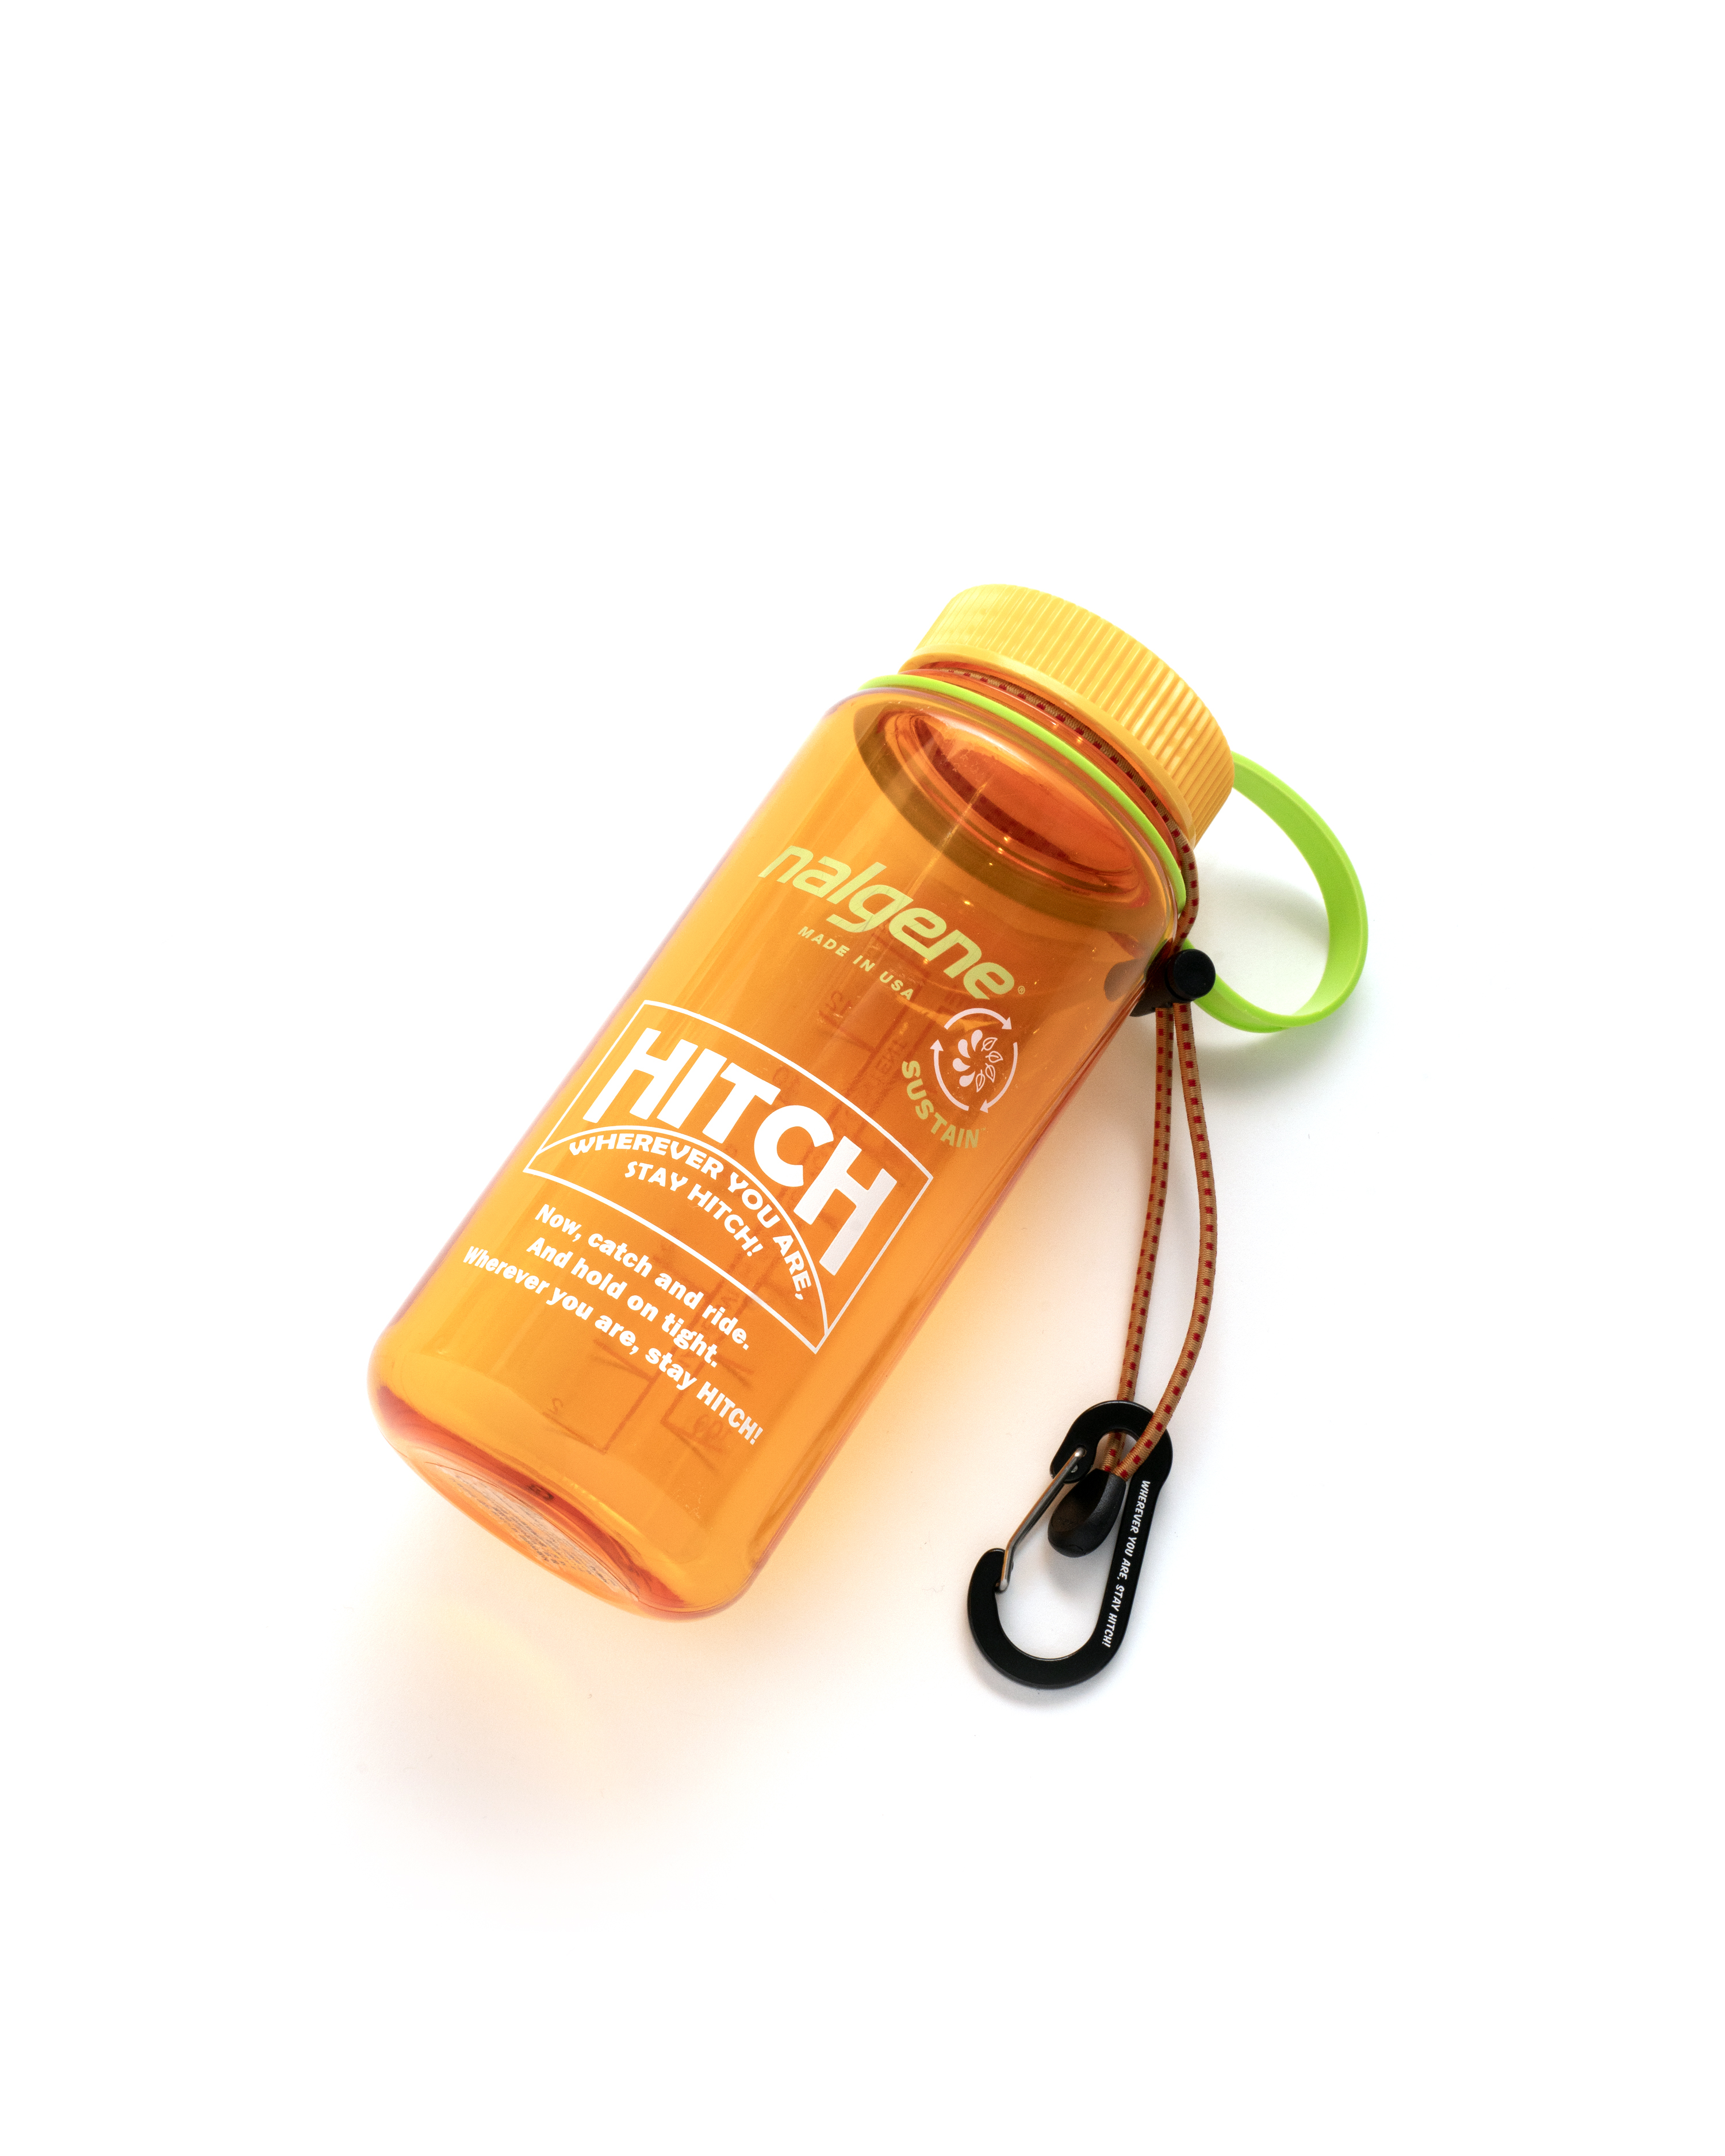 [out of stock] hitch x nalgene Bottle 0.5L - Clementine